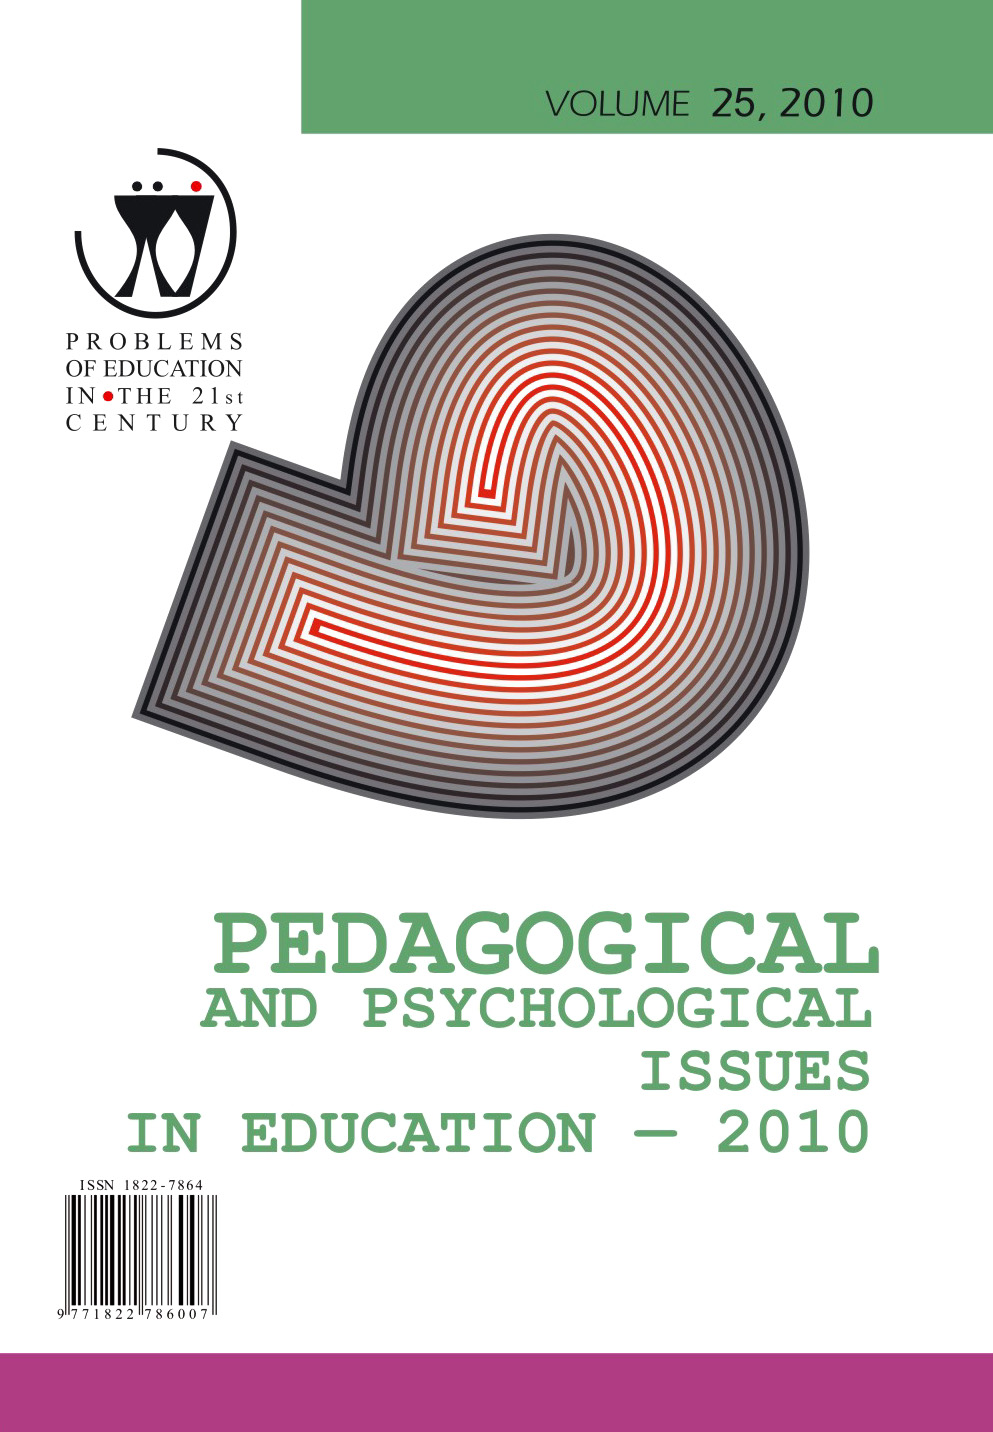 THE ROLE OF THE SCHOOL SOCIAL WORKER IN IMPROVING PUPIL’S ACHIEVEMENT THROUGH A SYNERGISTIC PARENT-PUPIL-TEACHER CONTEXTUAL COMMUNICATION Cover Image